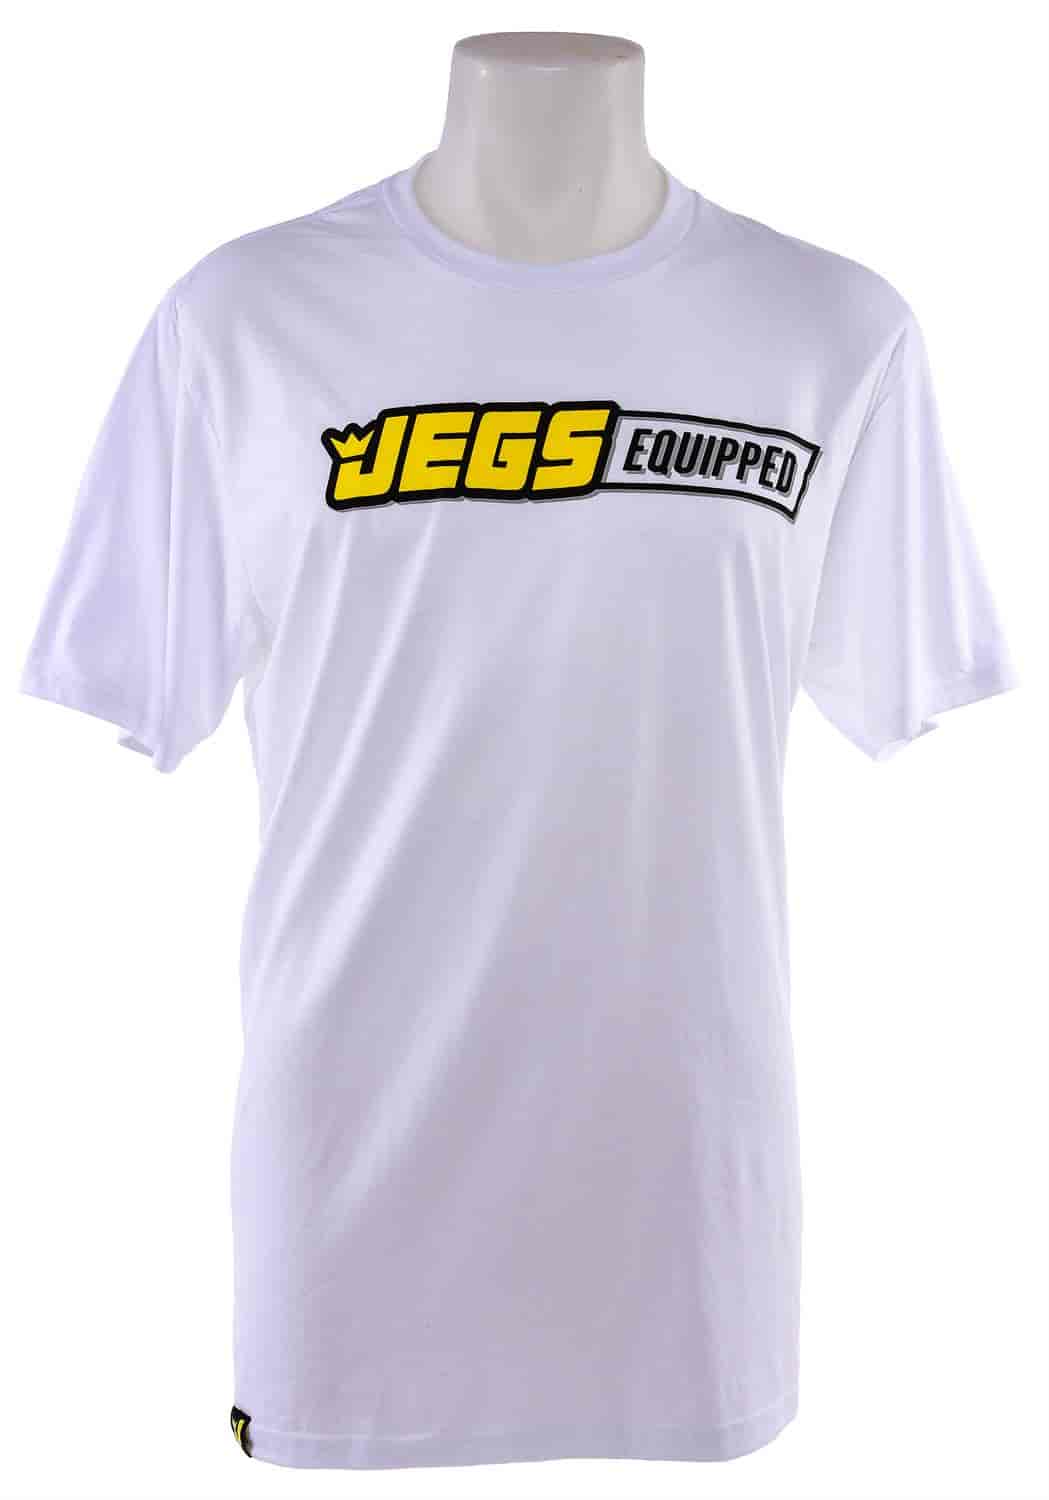 JEGS Equipped T-Shirt